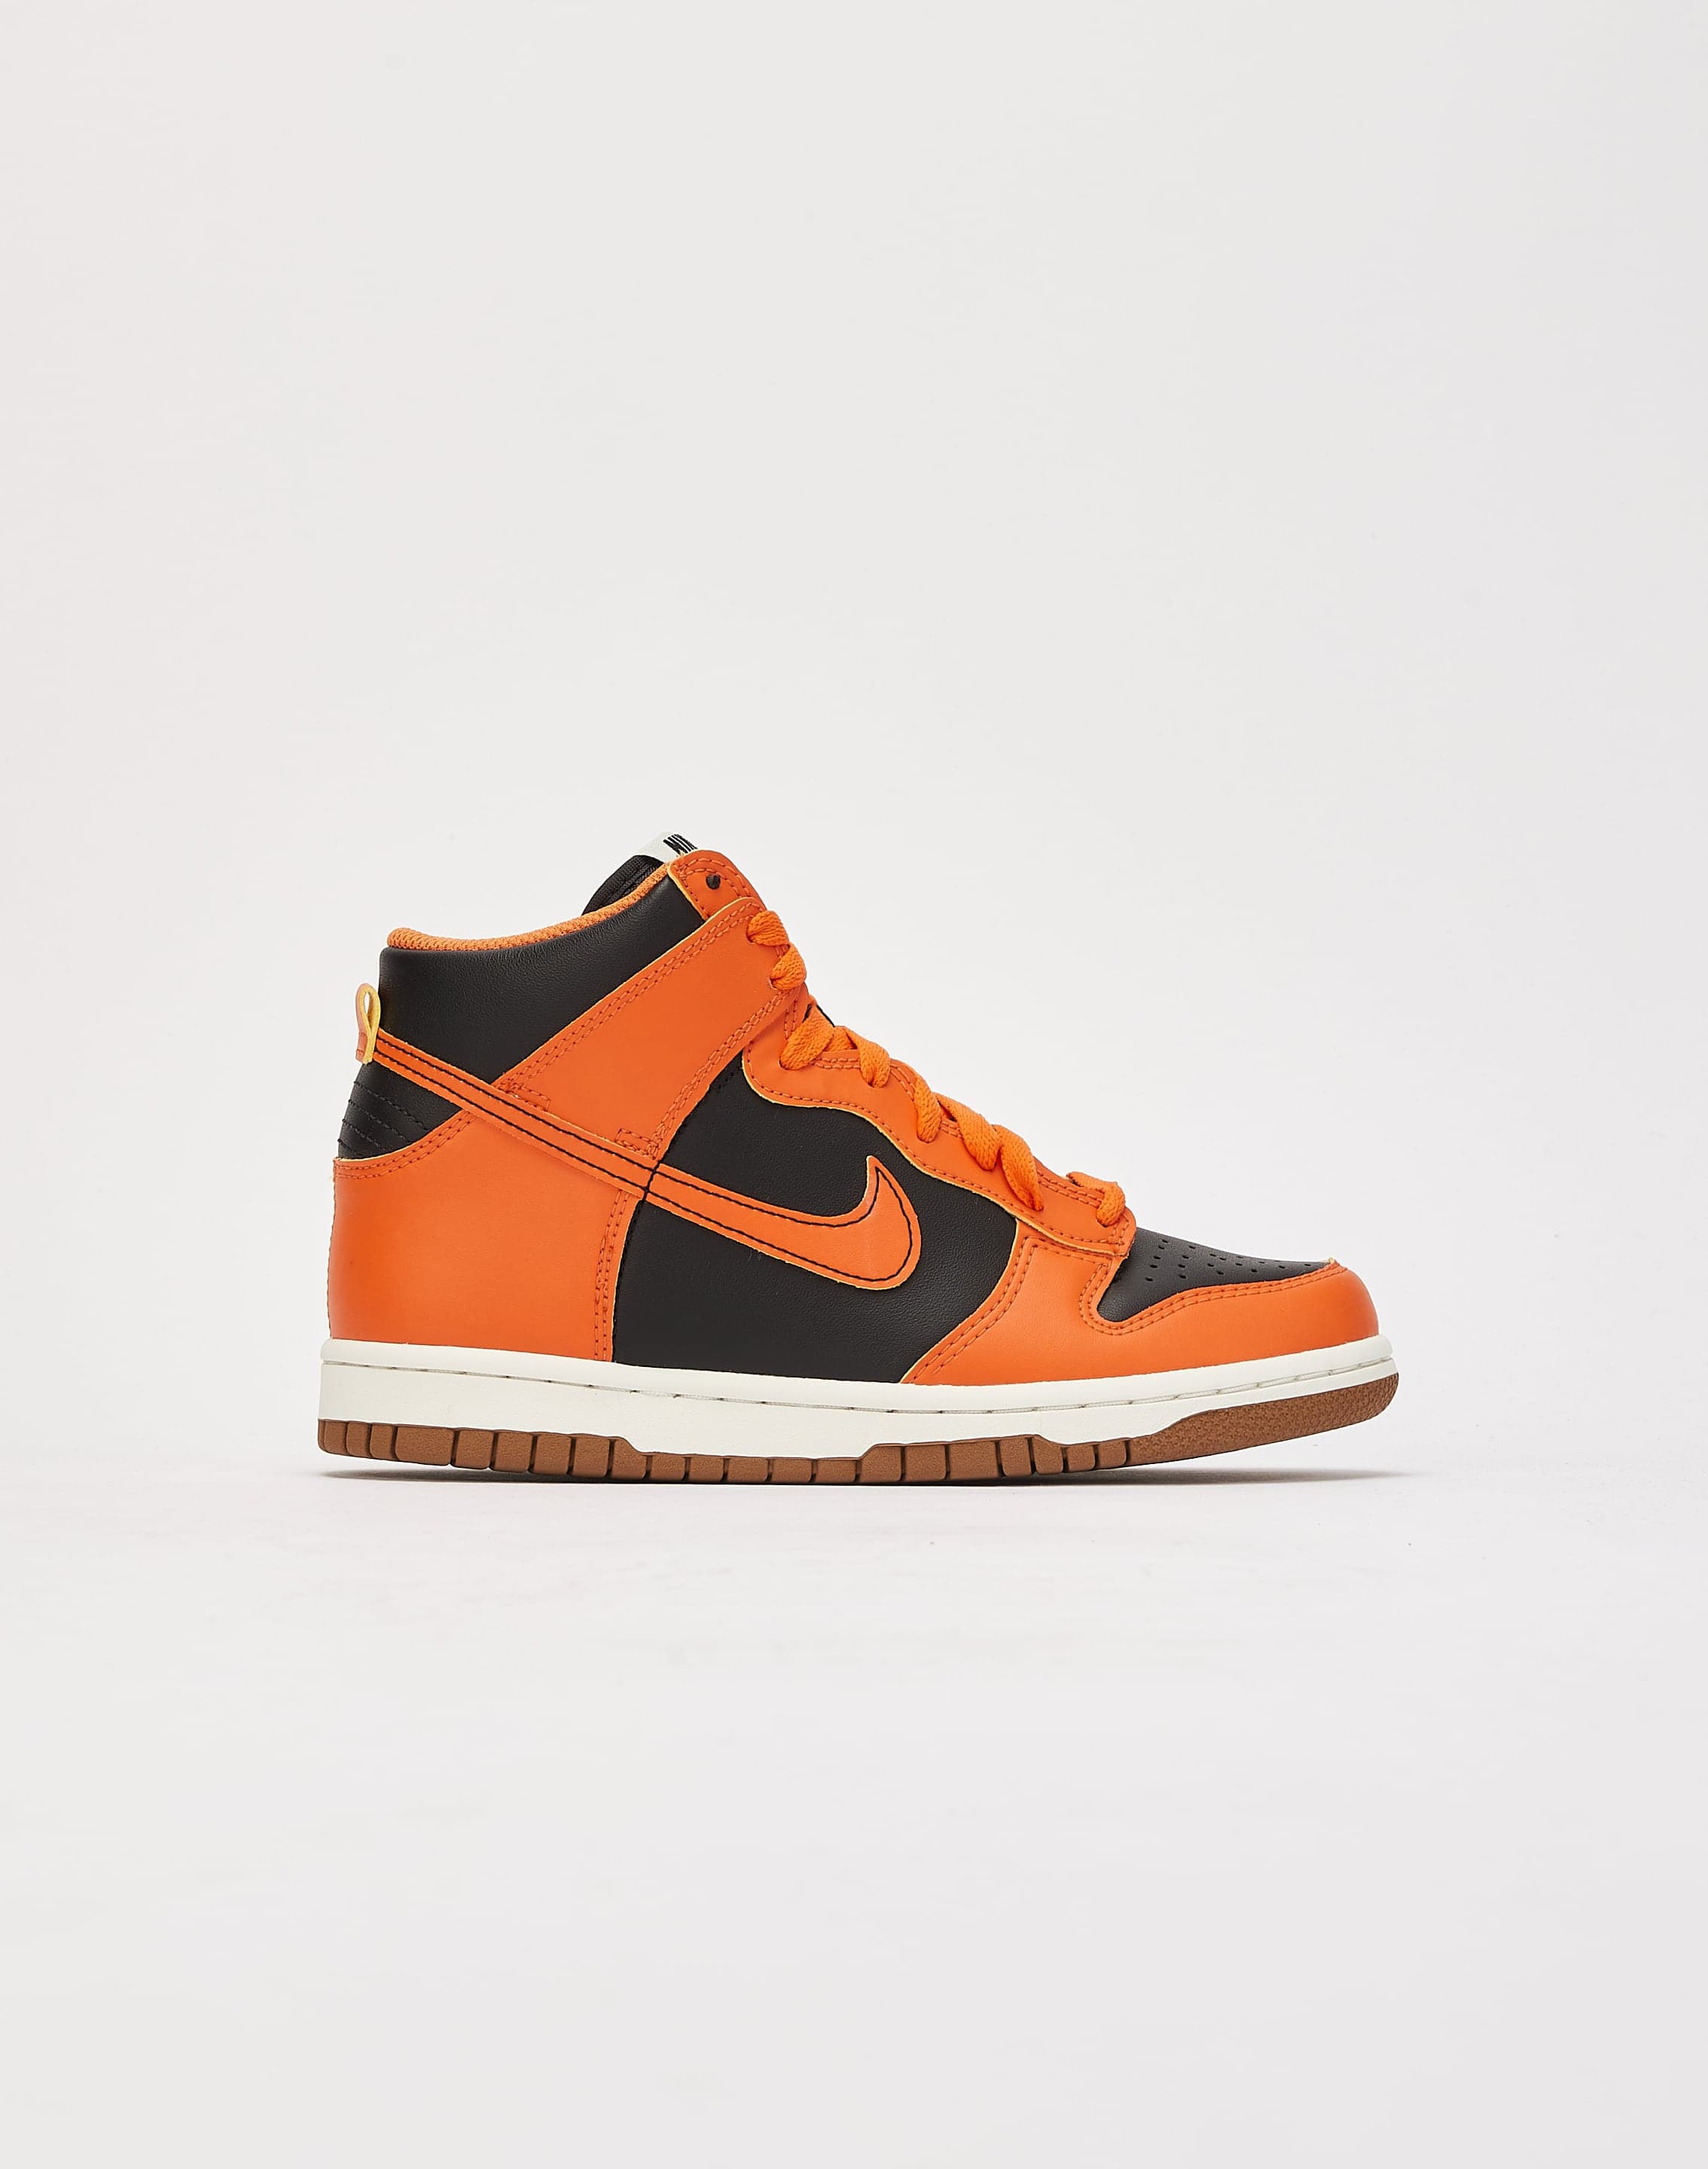 Nike Dunk High Black Safety Orange (GS) Raffles and Release Date